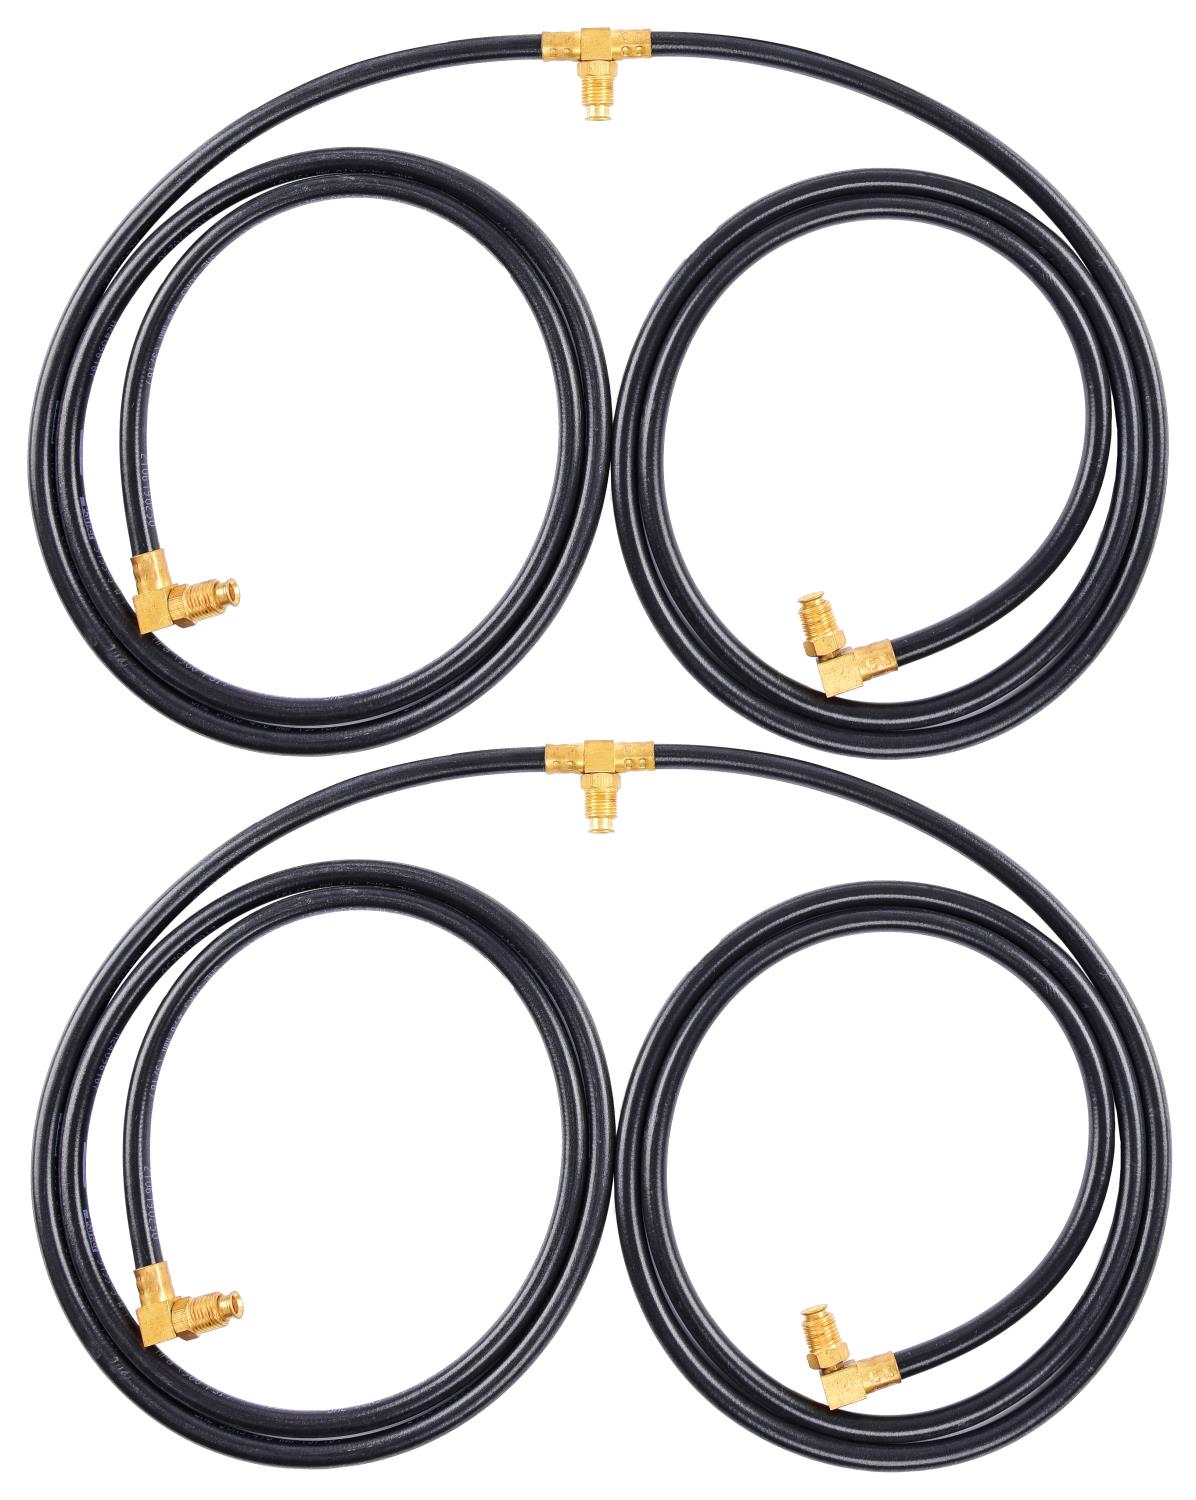 Universal Convertible Top Hose for 1947 Ford Deluxe,